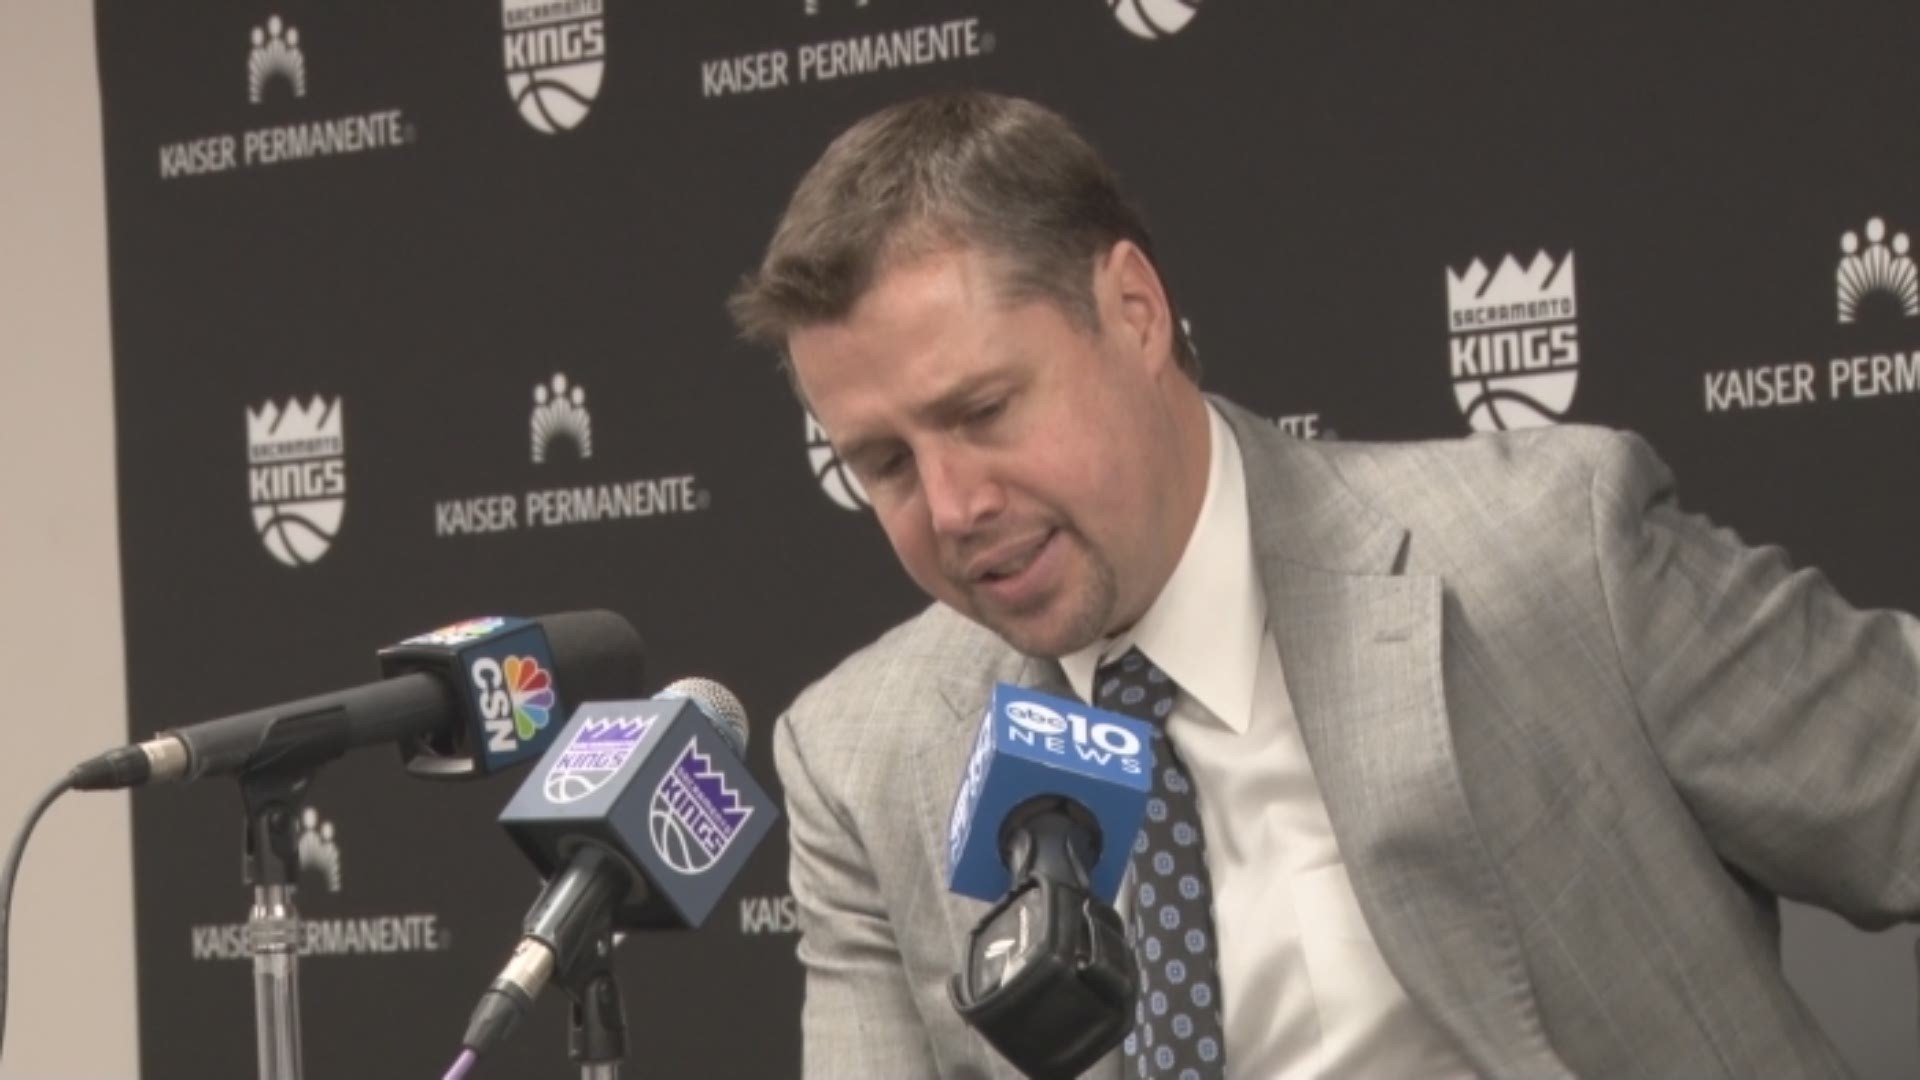 Sacramento Kings head coach Dave Joerger discusses Wednesday night's loss to the Indiana Pacers - dropping the team to 1-6 on the home-stand, as well as the injury to Rudy Gay.